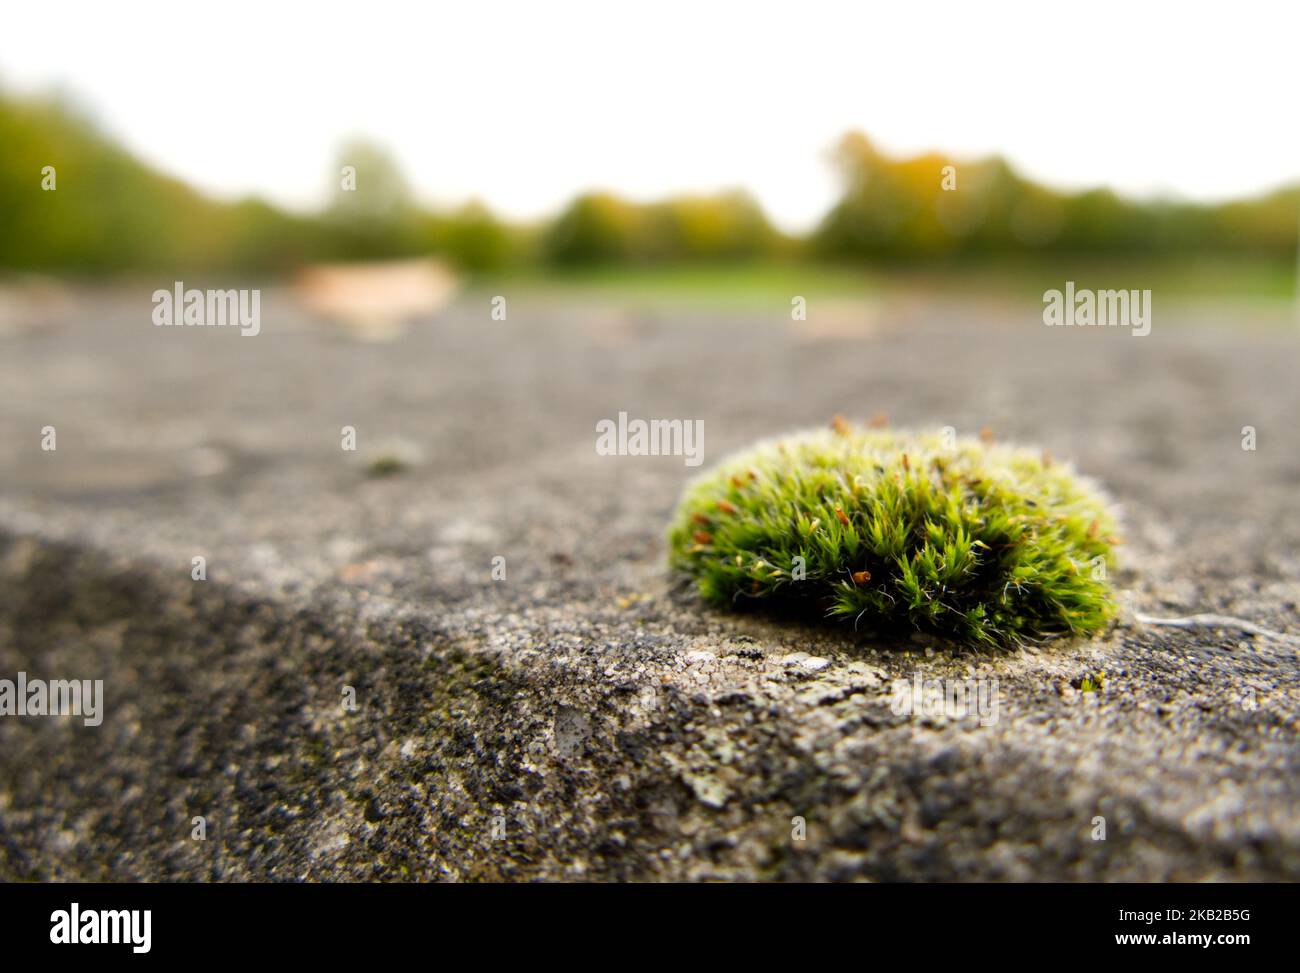 A small clump of moss growing on a weathered concrete wall, with bokeh trees in the background. Short depth of field and selective focus. Stock Photo